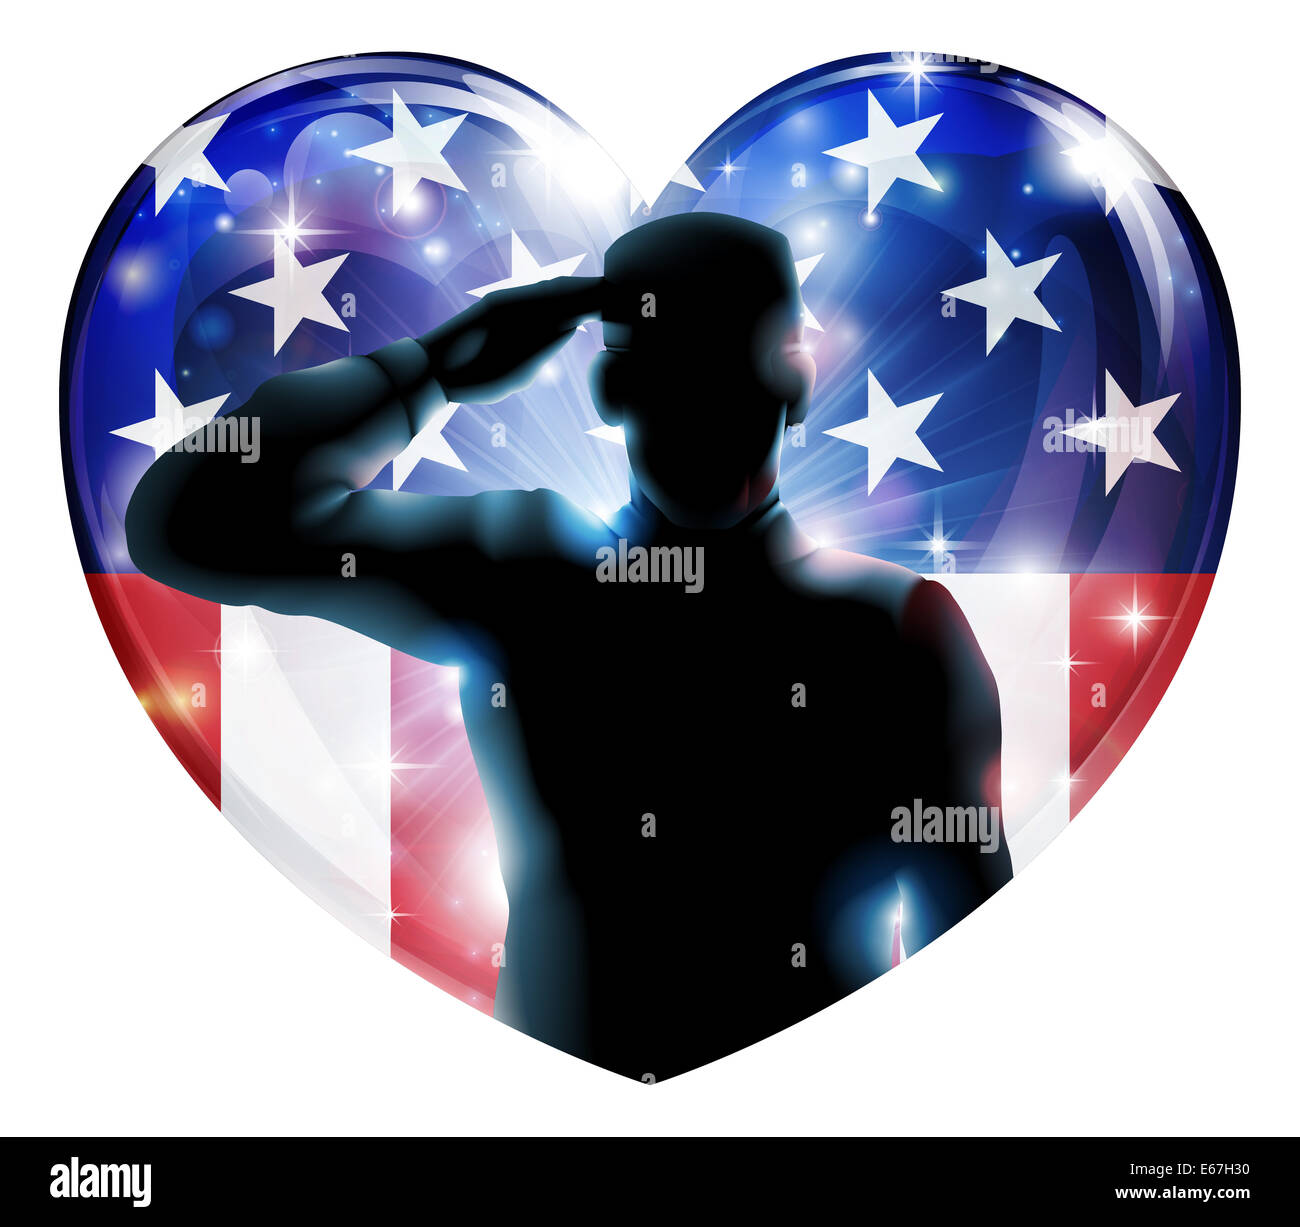 Illustration of a heart shape Veterans Day or 4th July Independence Day of a soldier saluting in front of American flag Stock Photo